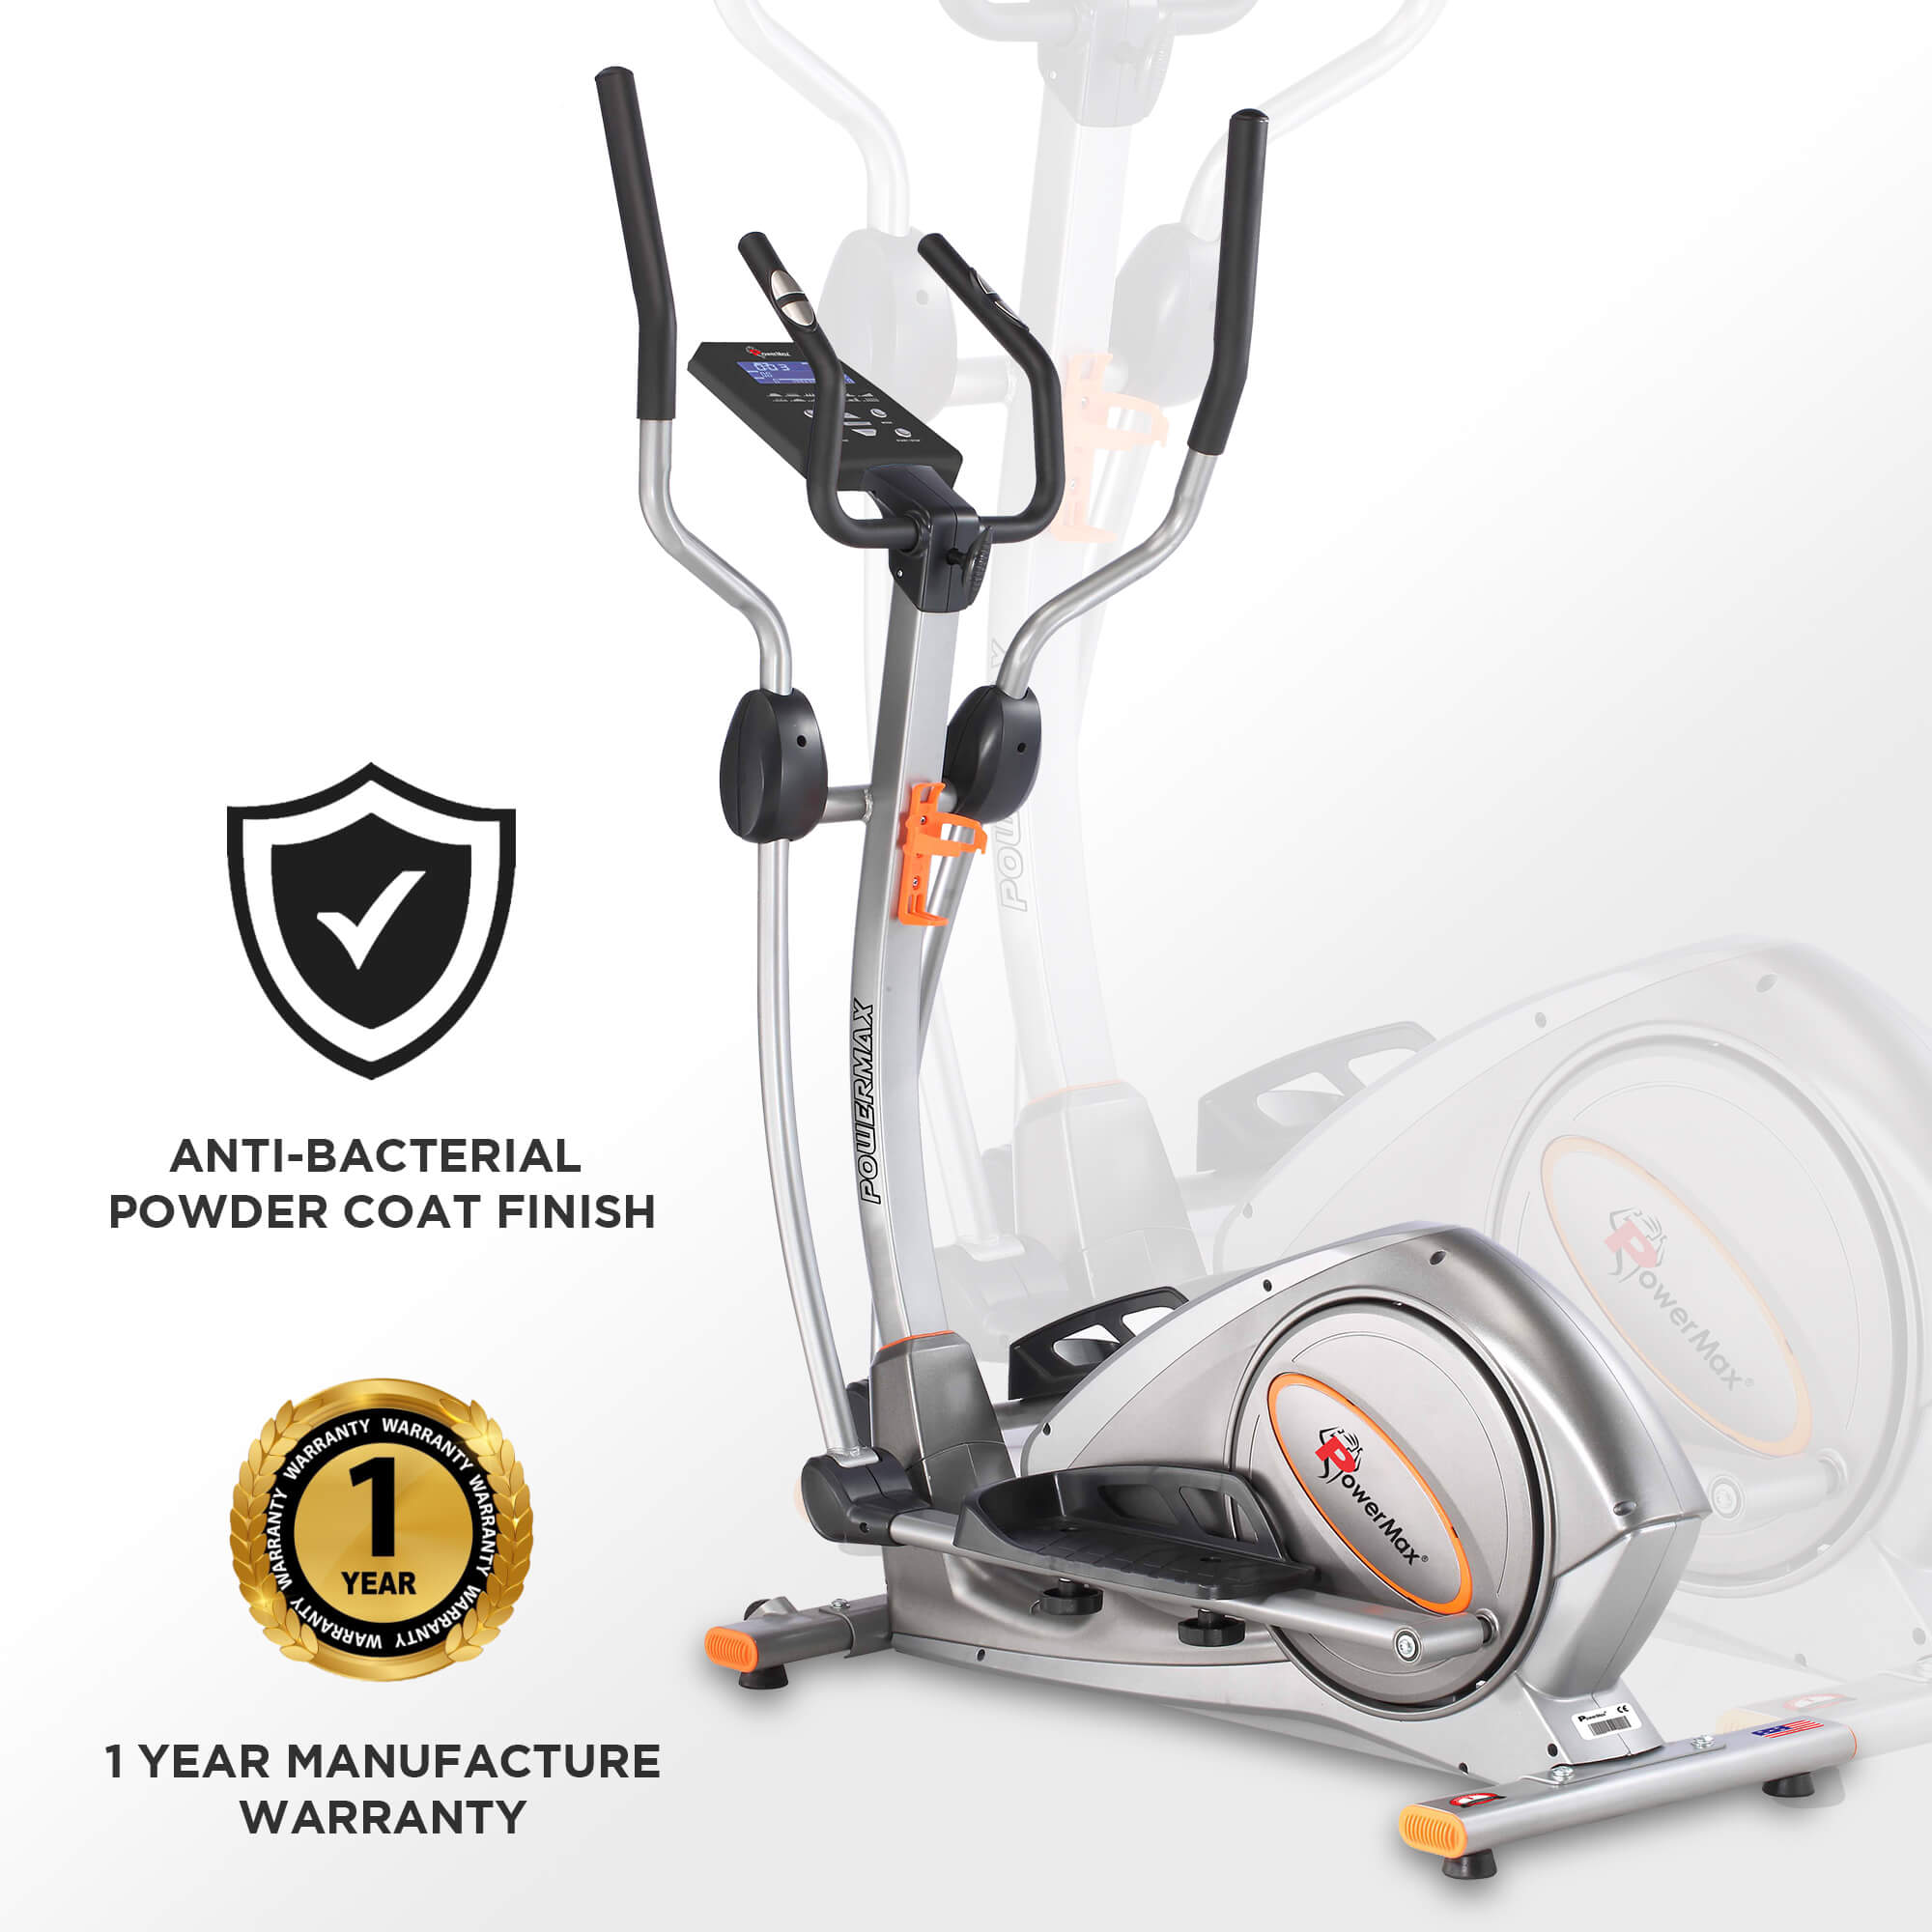 PowerMax Fitness New 2021 EH-750 Elliptical Cross Trainer with Water Bottle Cage